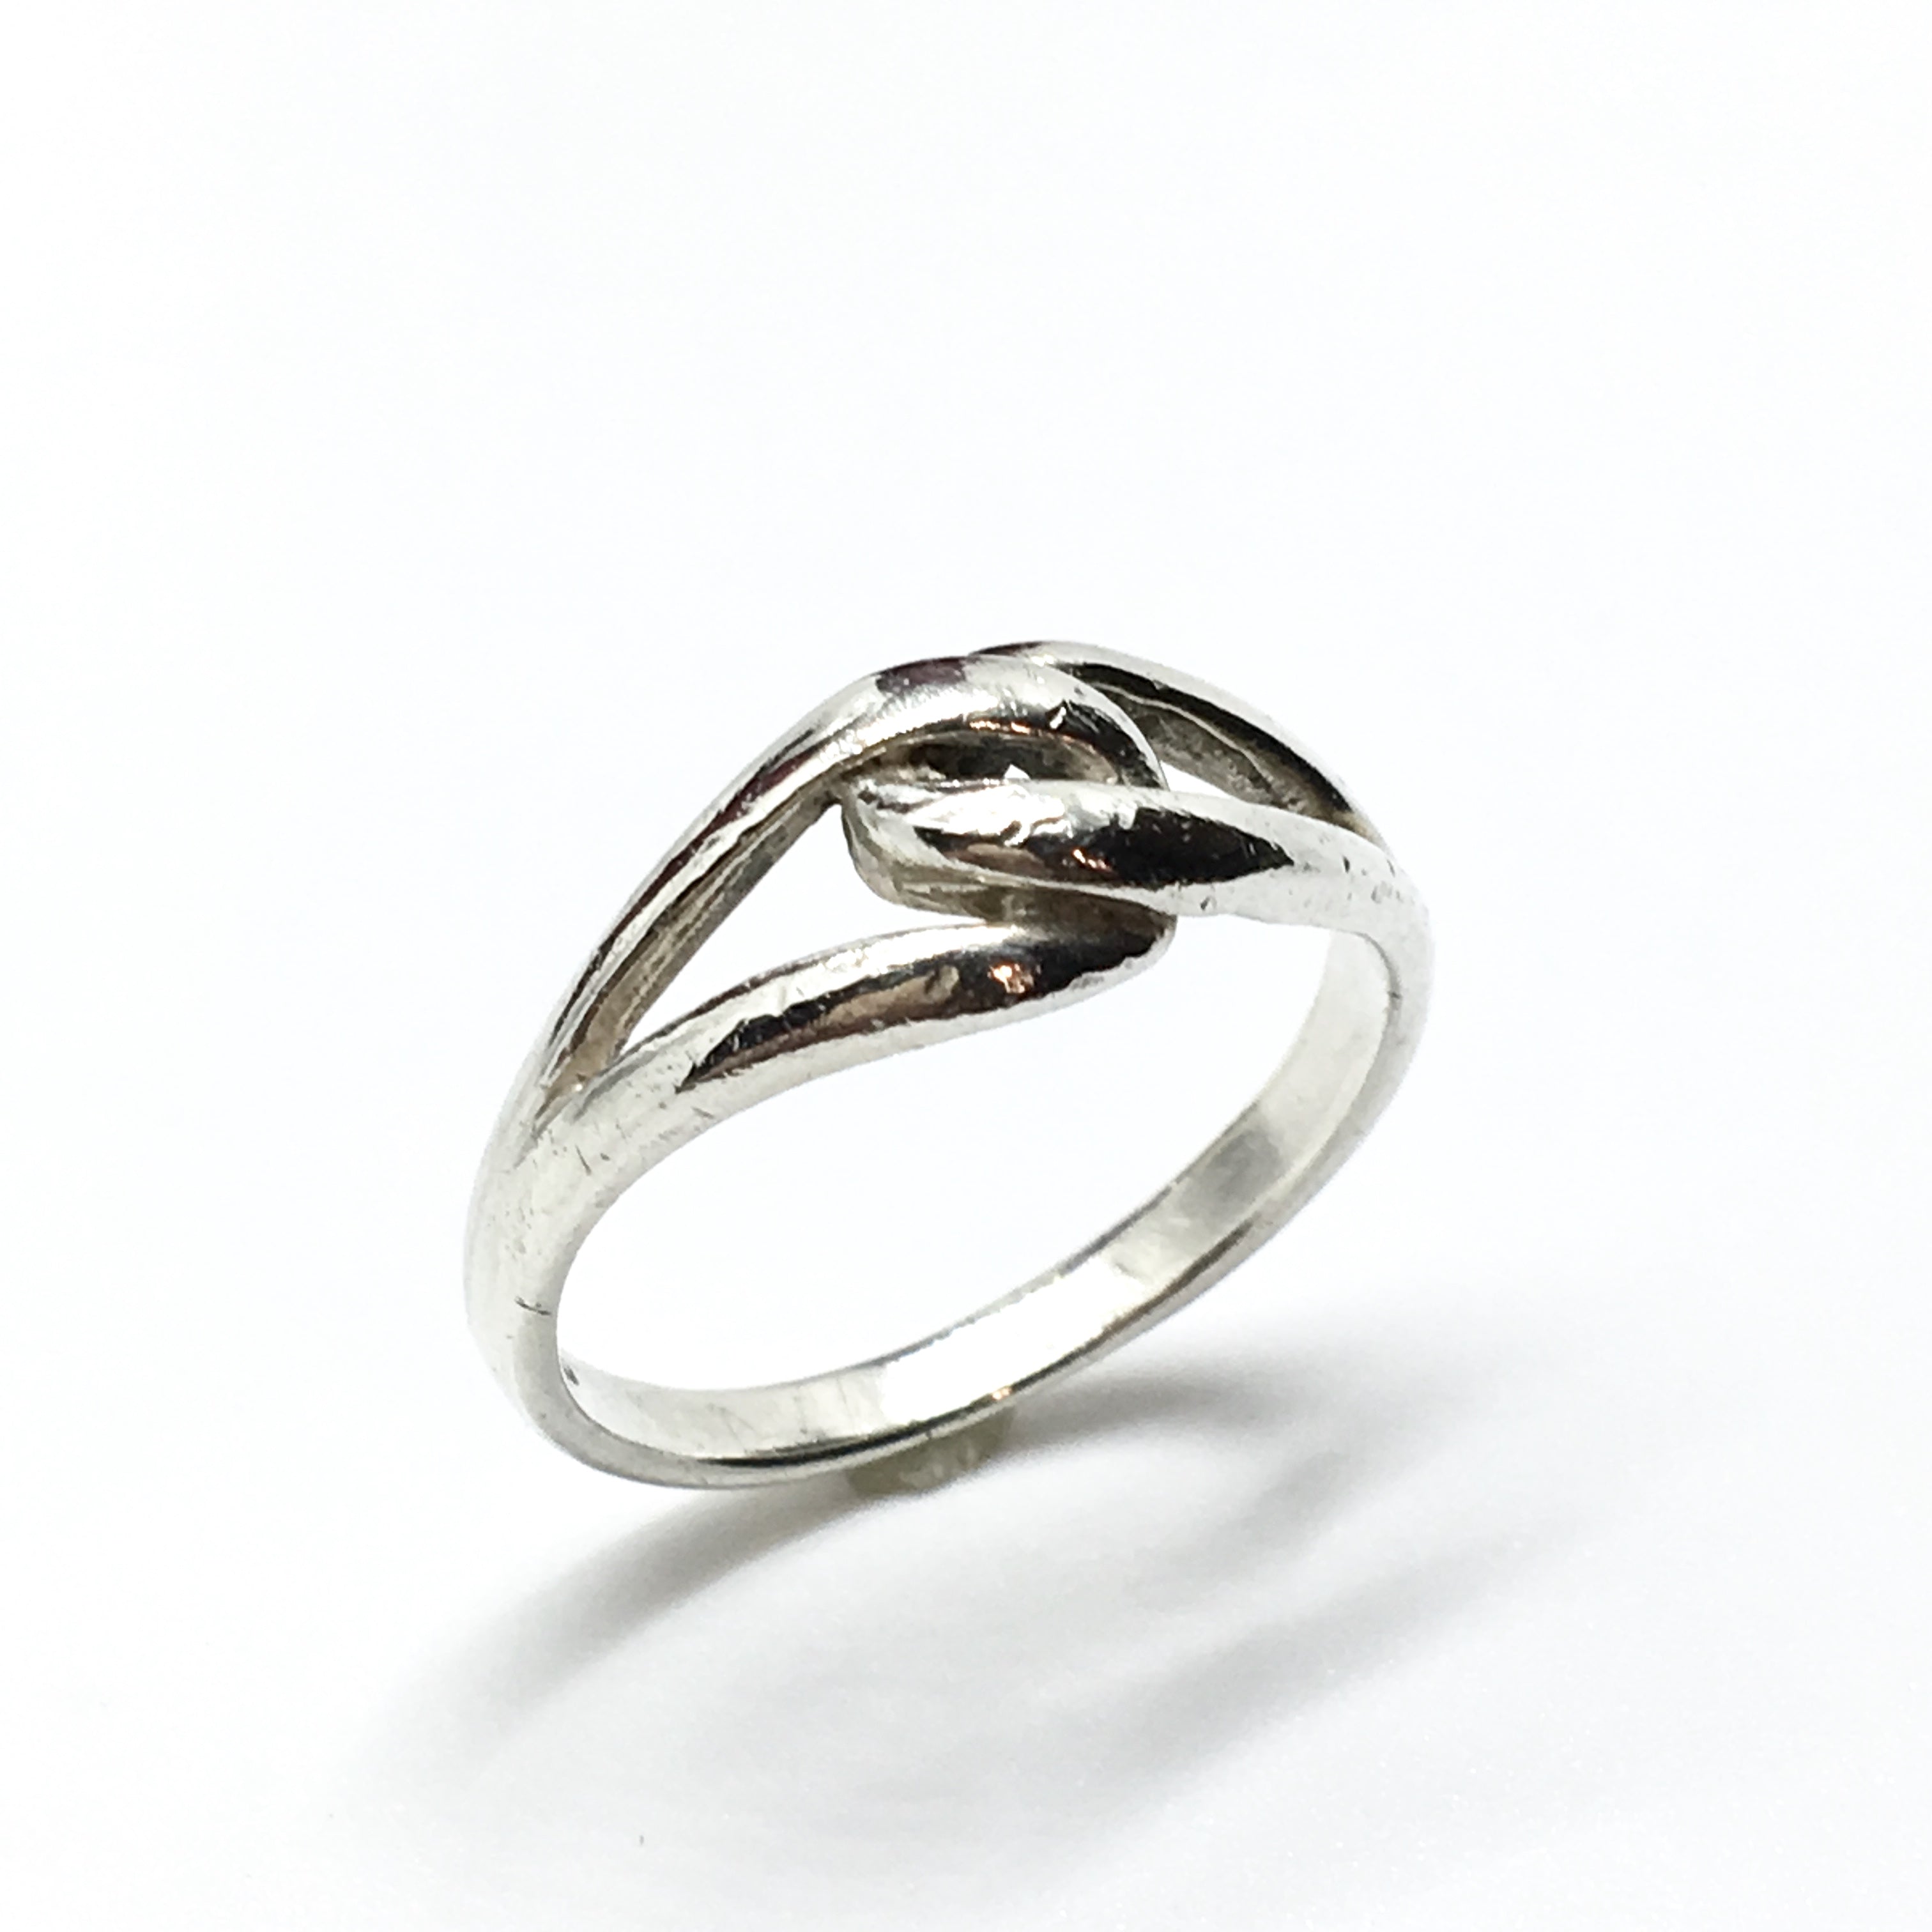 Buy Silver Rings for Women by Praavy Online | Ajio.com